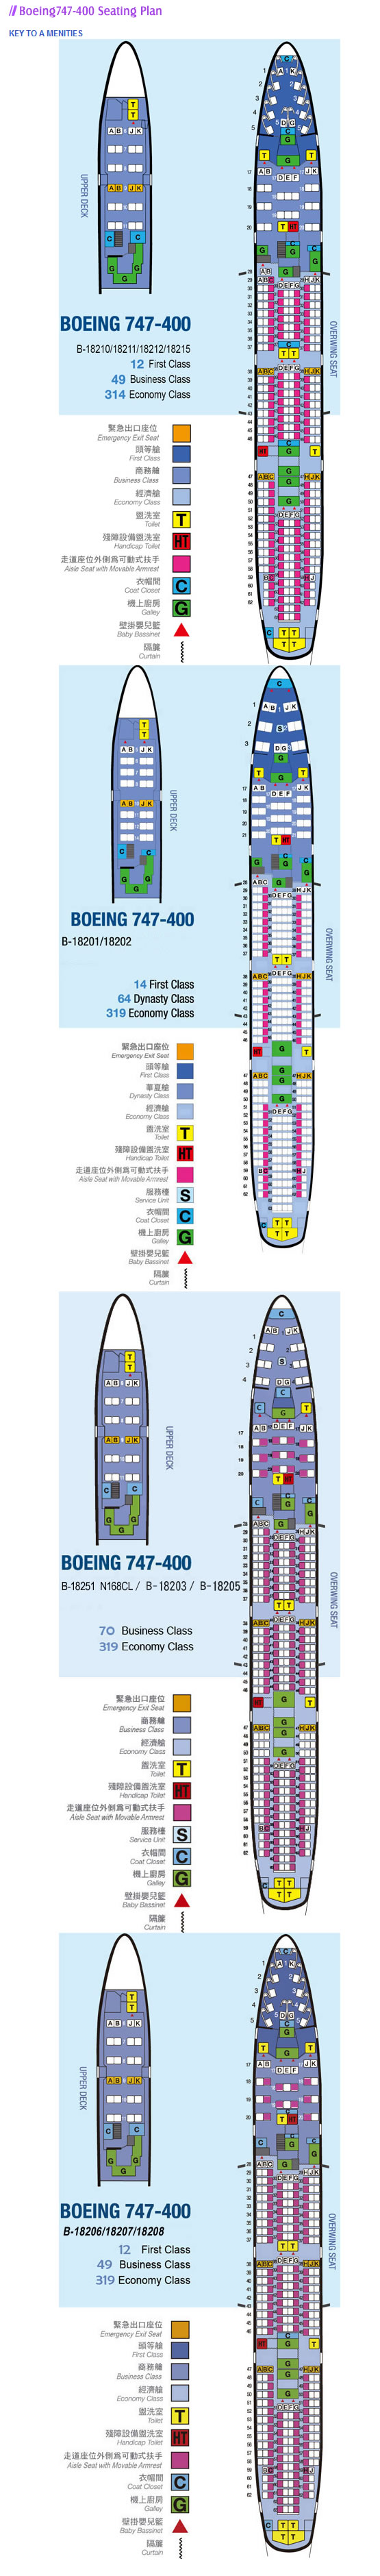 CHINA AIRLINES BOEING 747-400 AIRCRAFT SEATING CHART